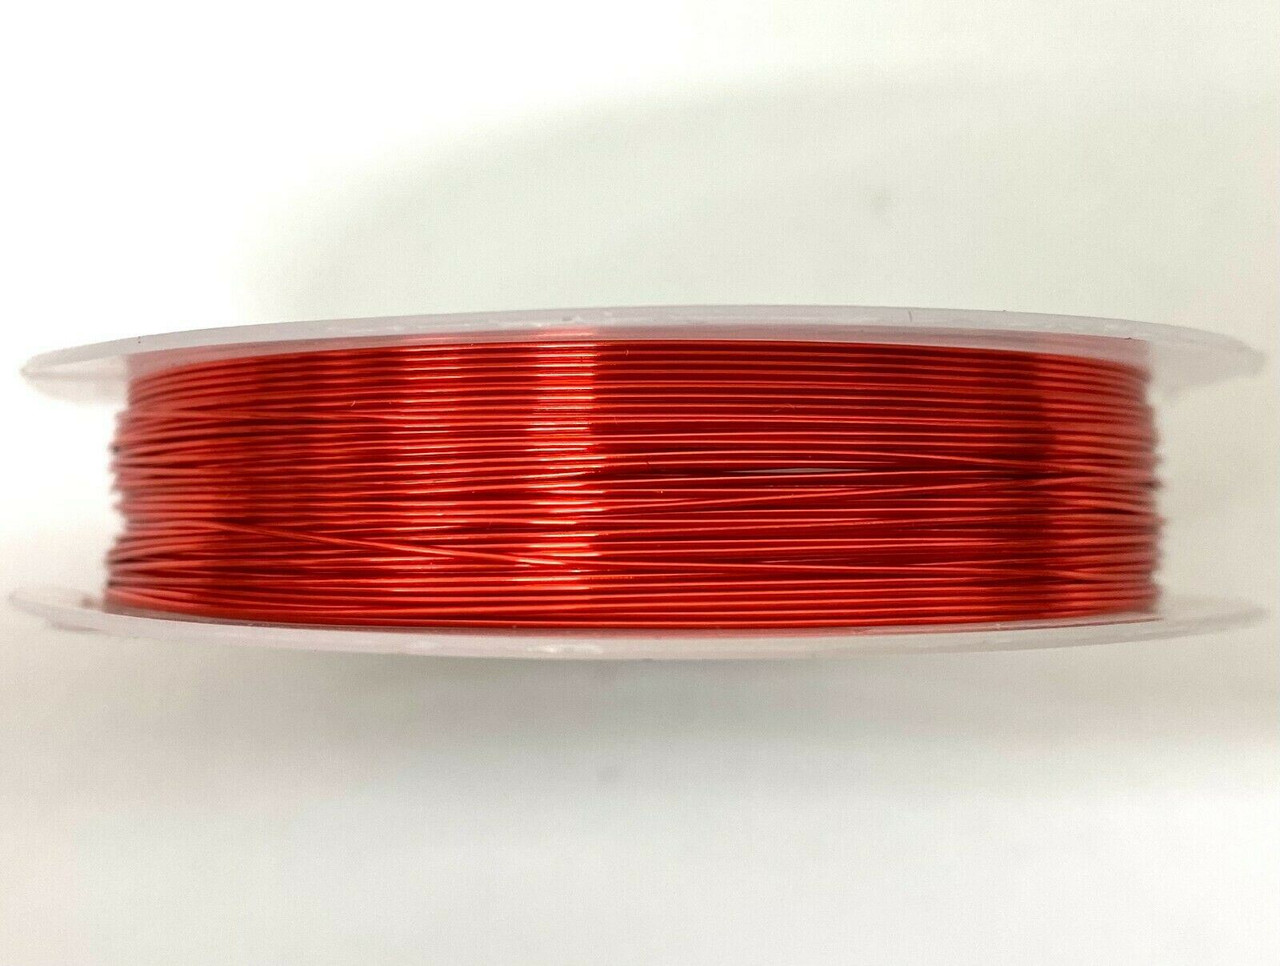 Roll of Copper Wire, 0.5mm thickness, RED colour, approx 9m length